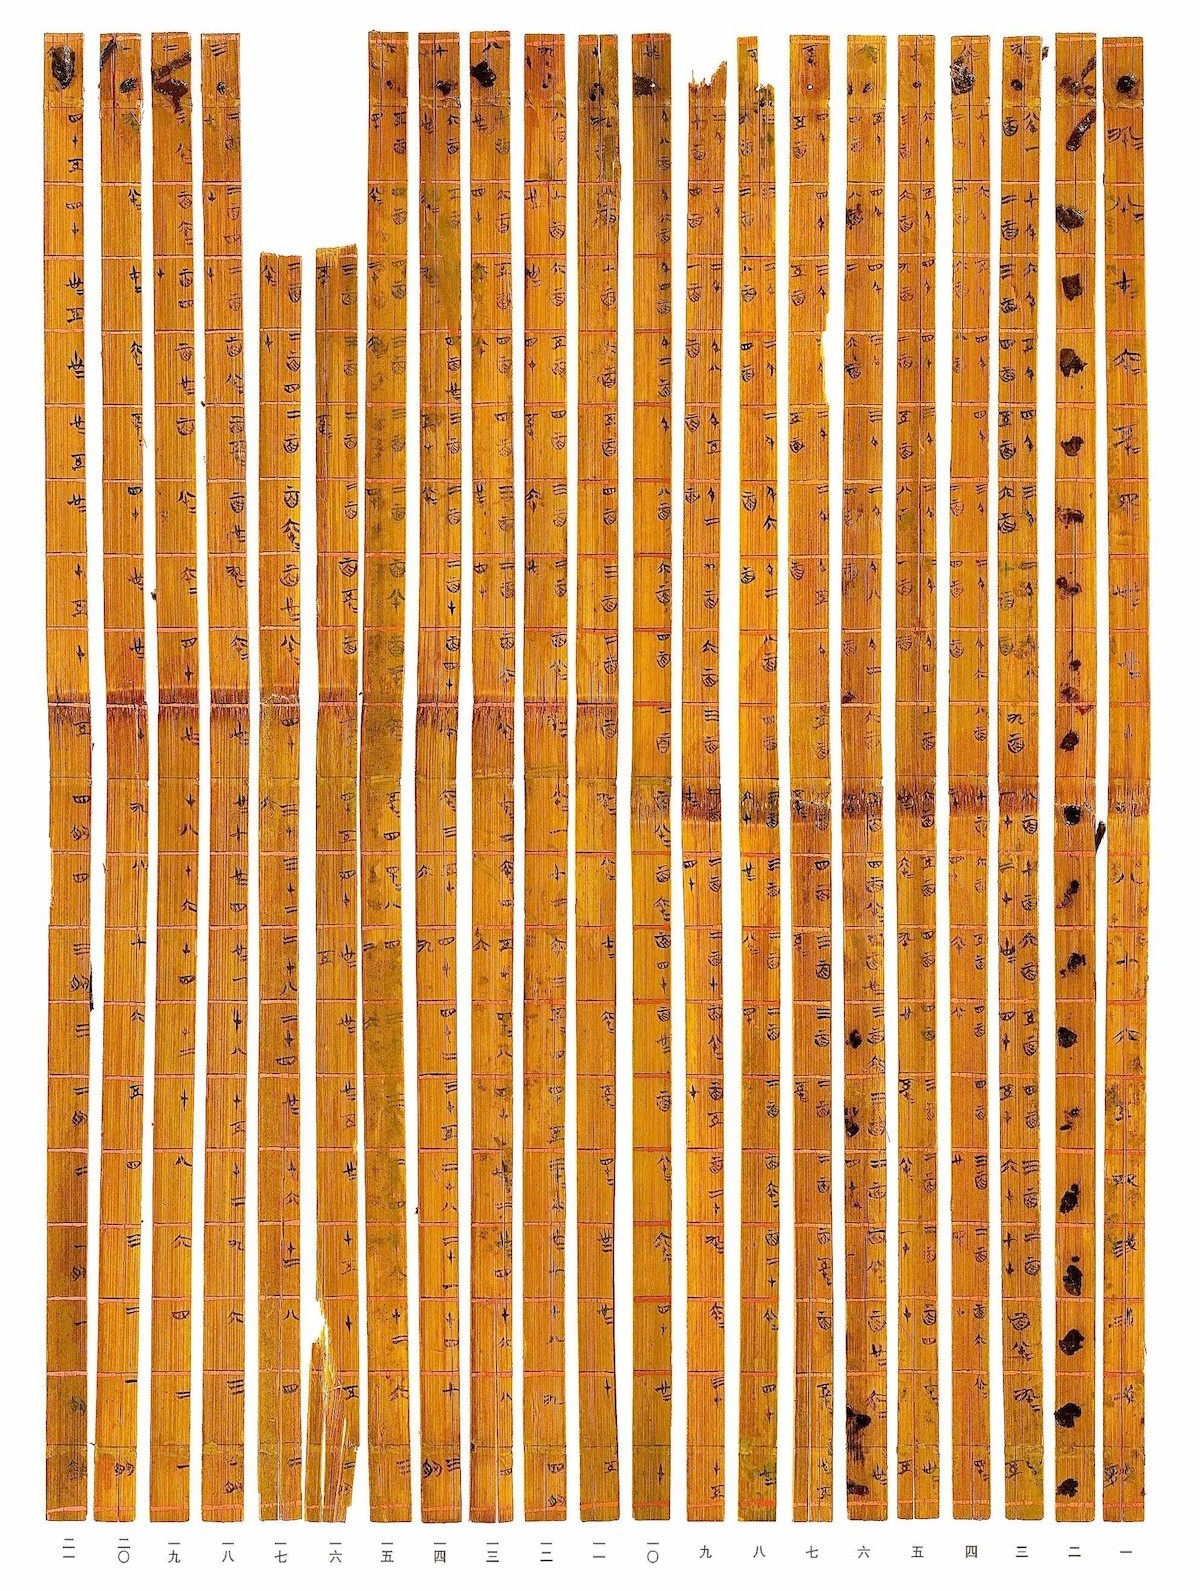 Ancient times table hidden in Chinese bamboo strips | Nature